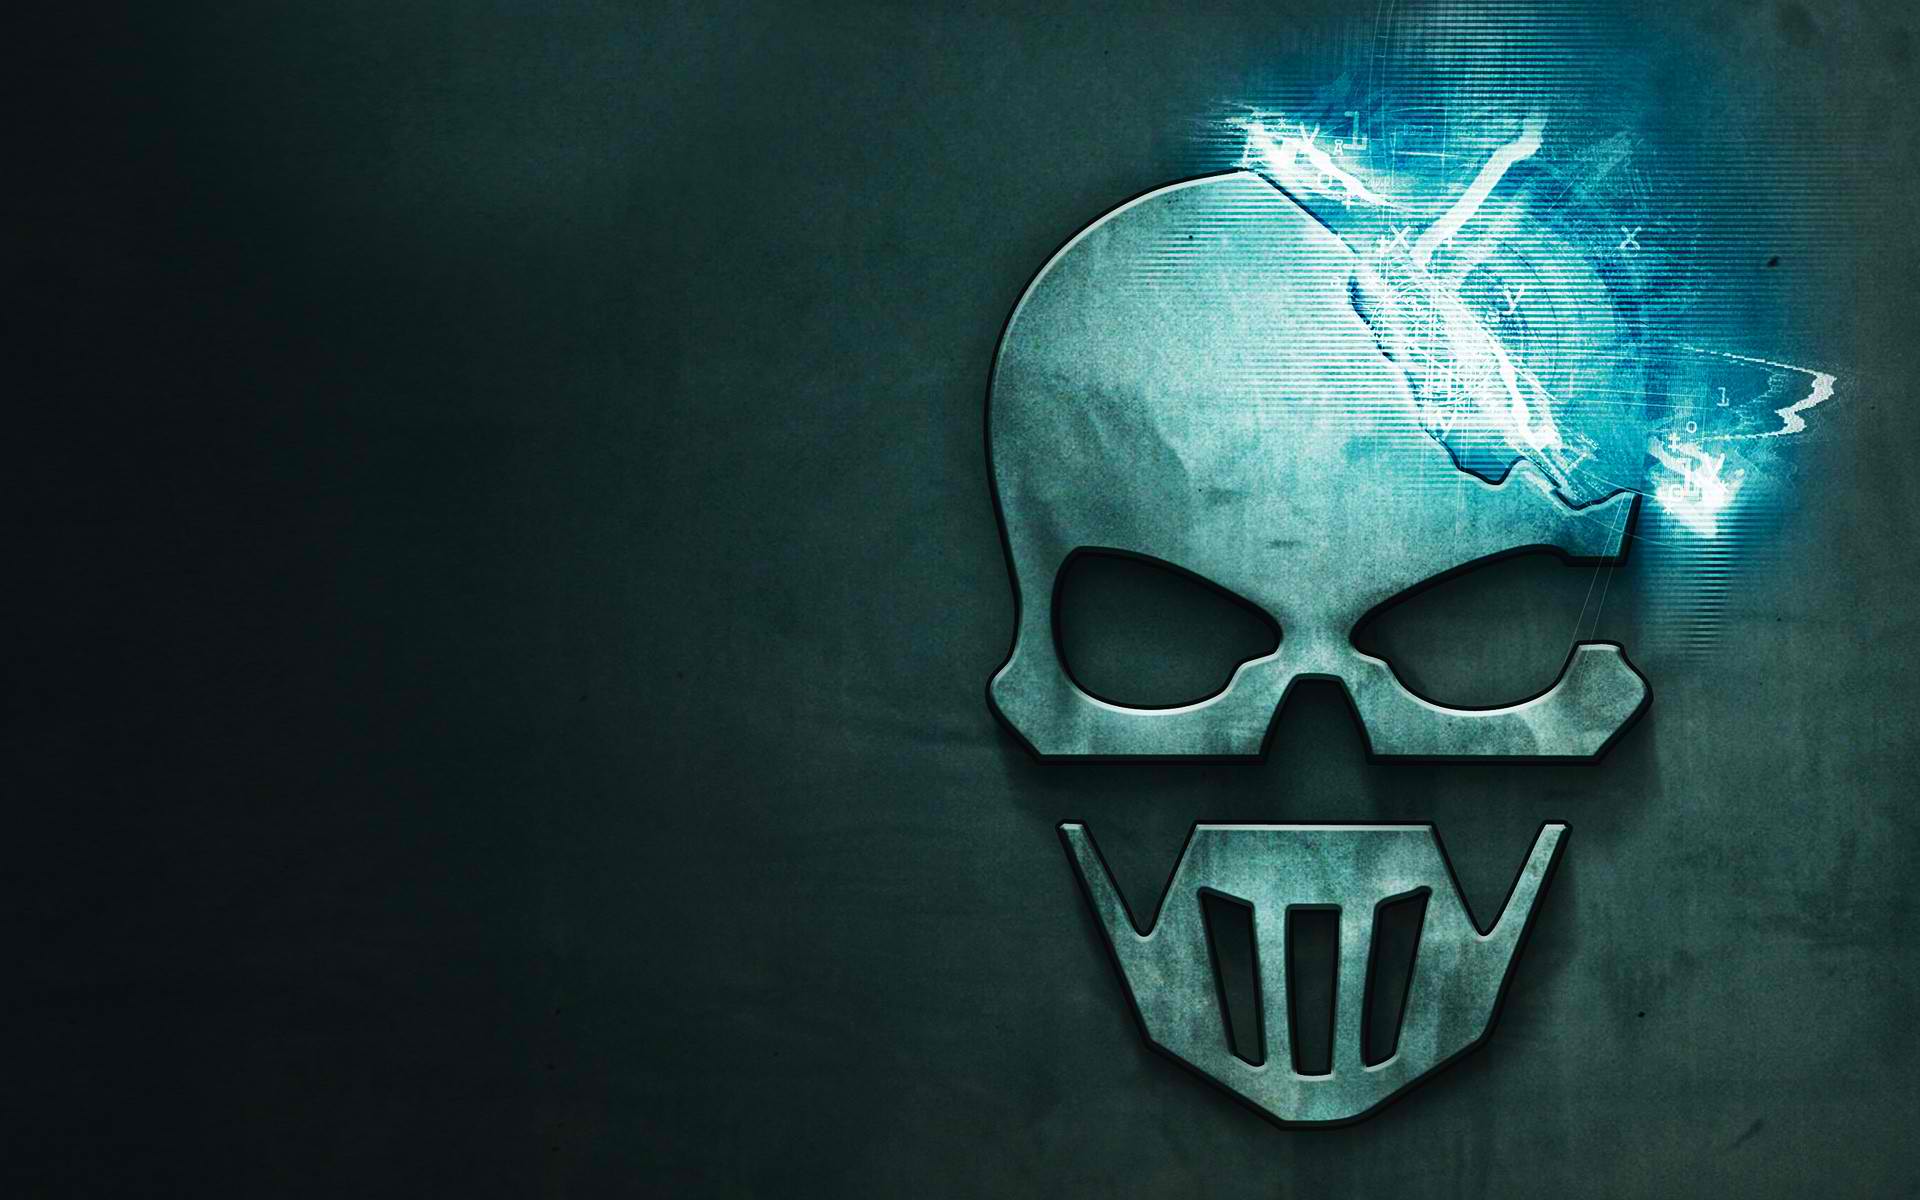 wallpaper4mecomimageswallpapersghost recon future soldier w1jpeg